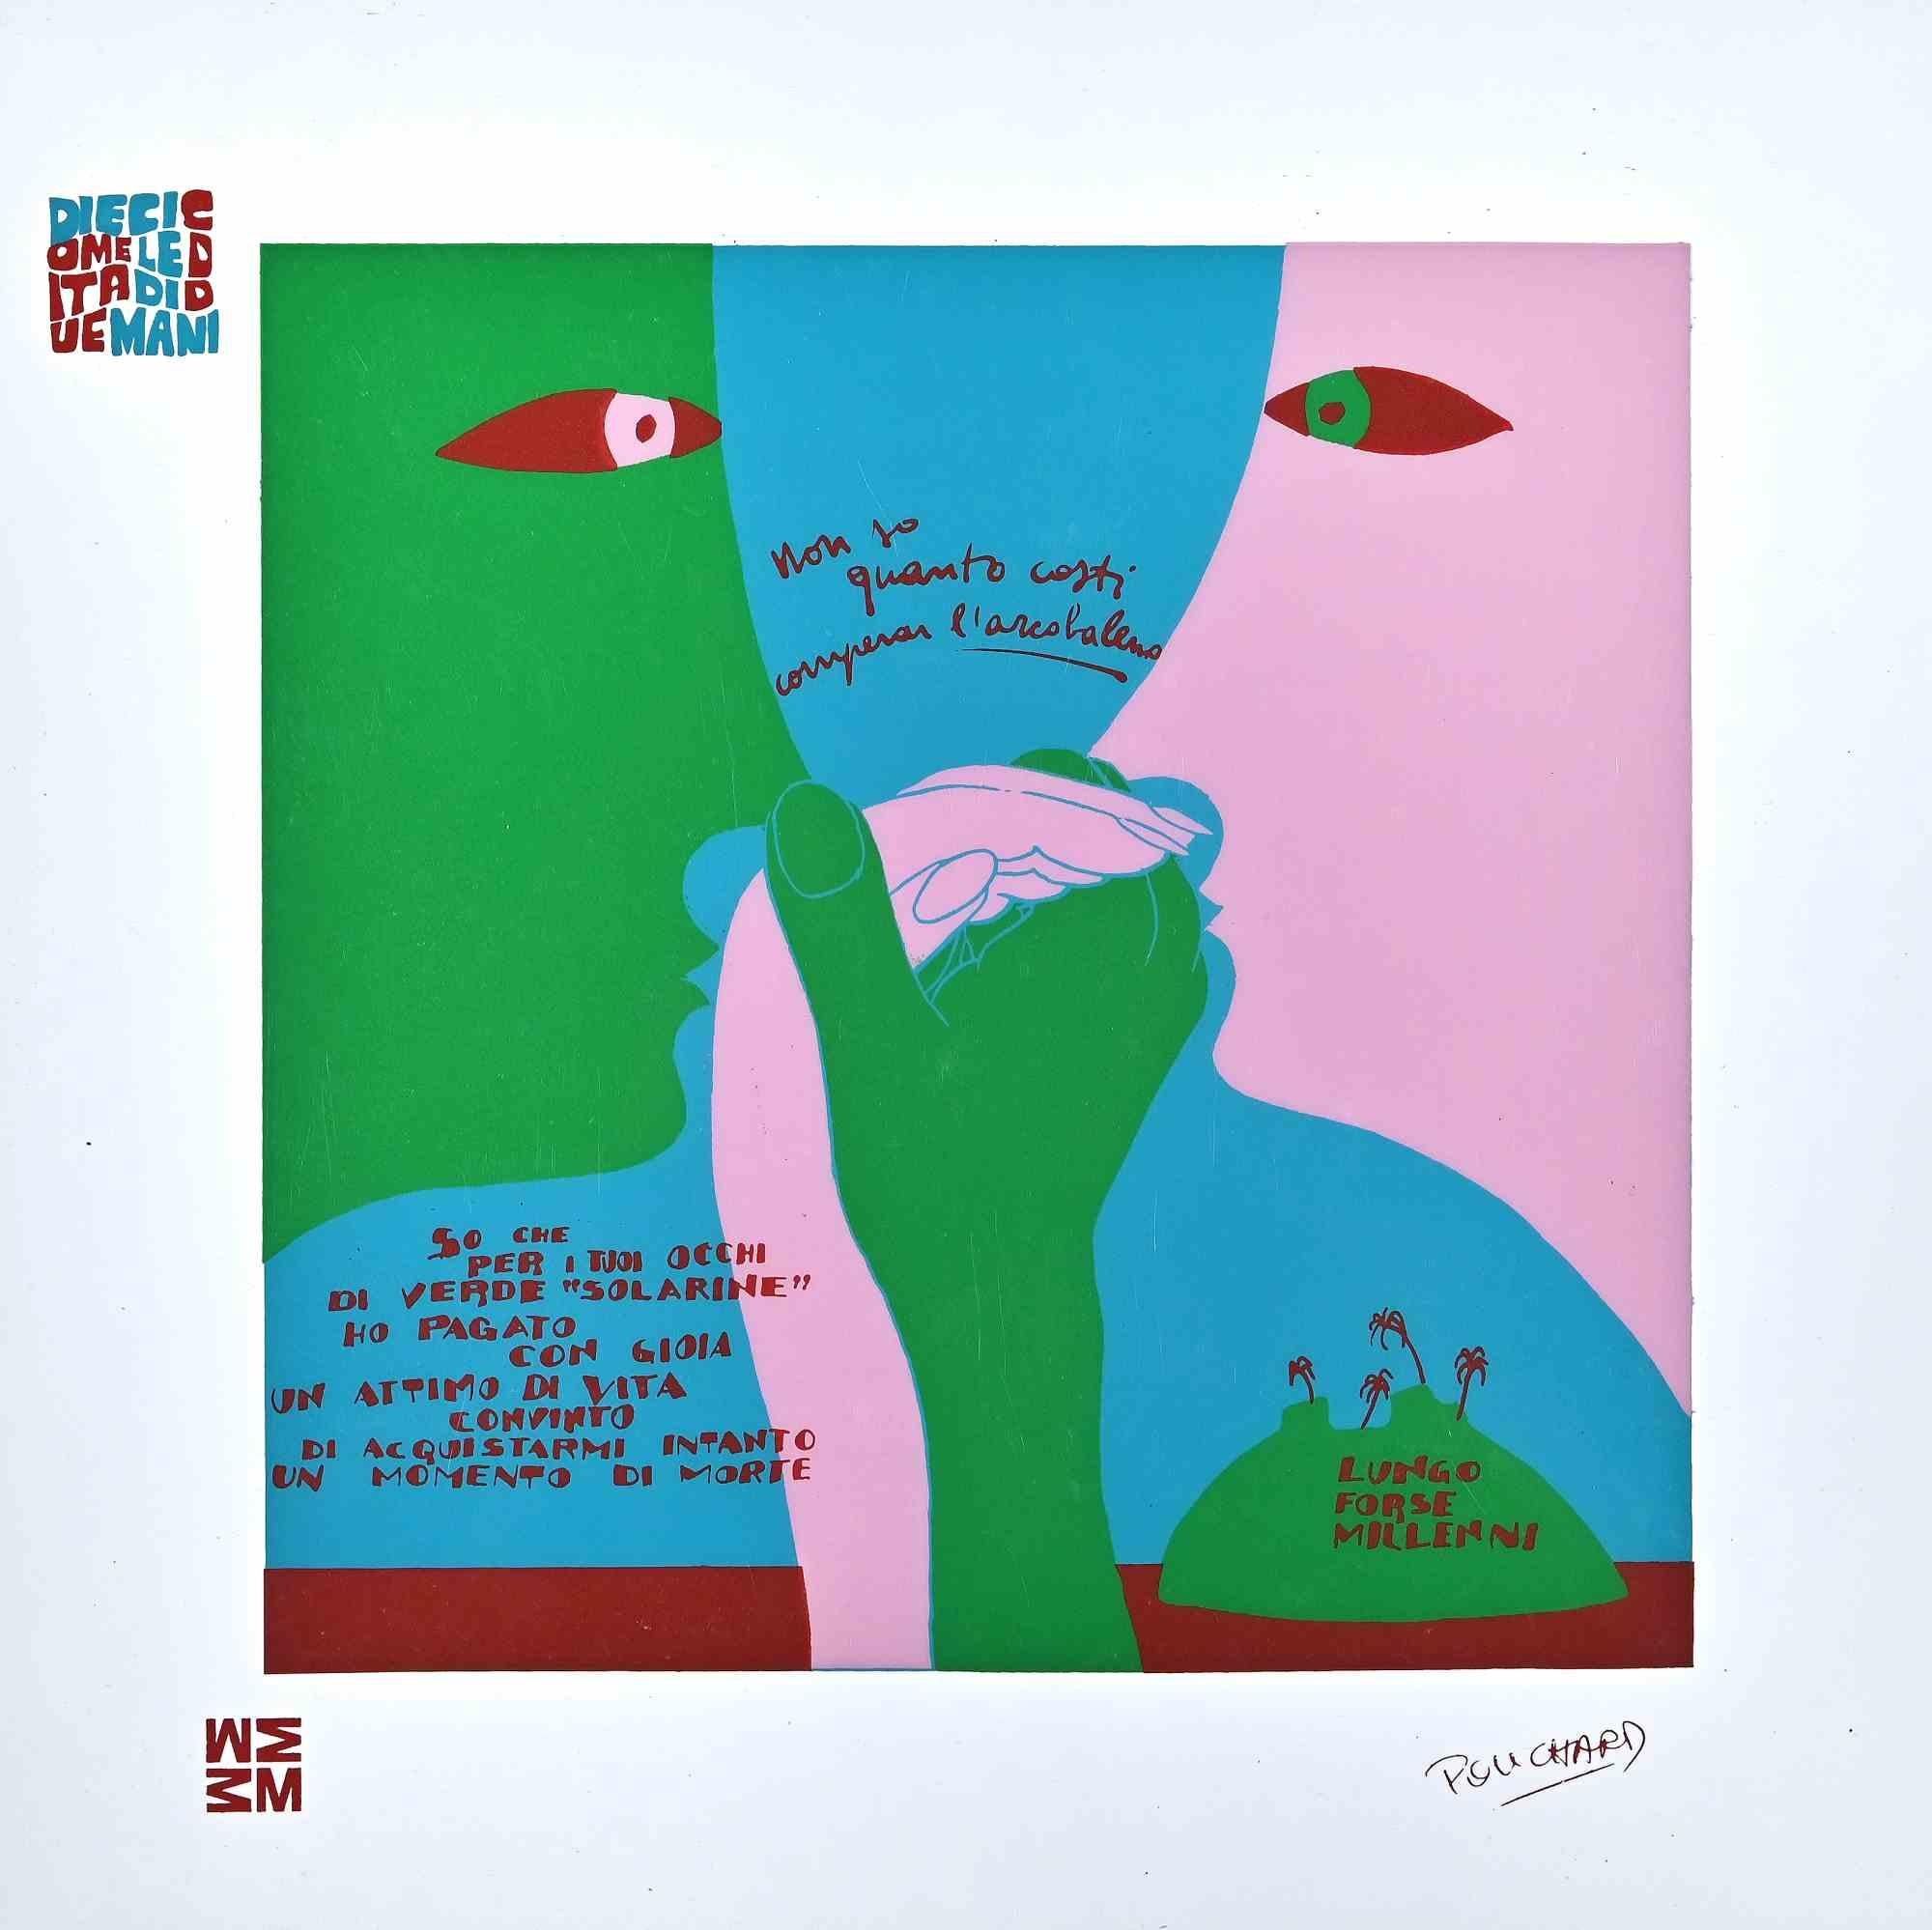 Una Perla is a color silk-screen print on acetates, realized in  1973  by the artist  Ennio Pouchard  (1928).

Signed on plate  on the lower right.

From the porfolio " Diecicomeleditadiduemani ", containing 10 silk-screen prints on acetates, with